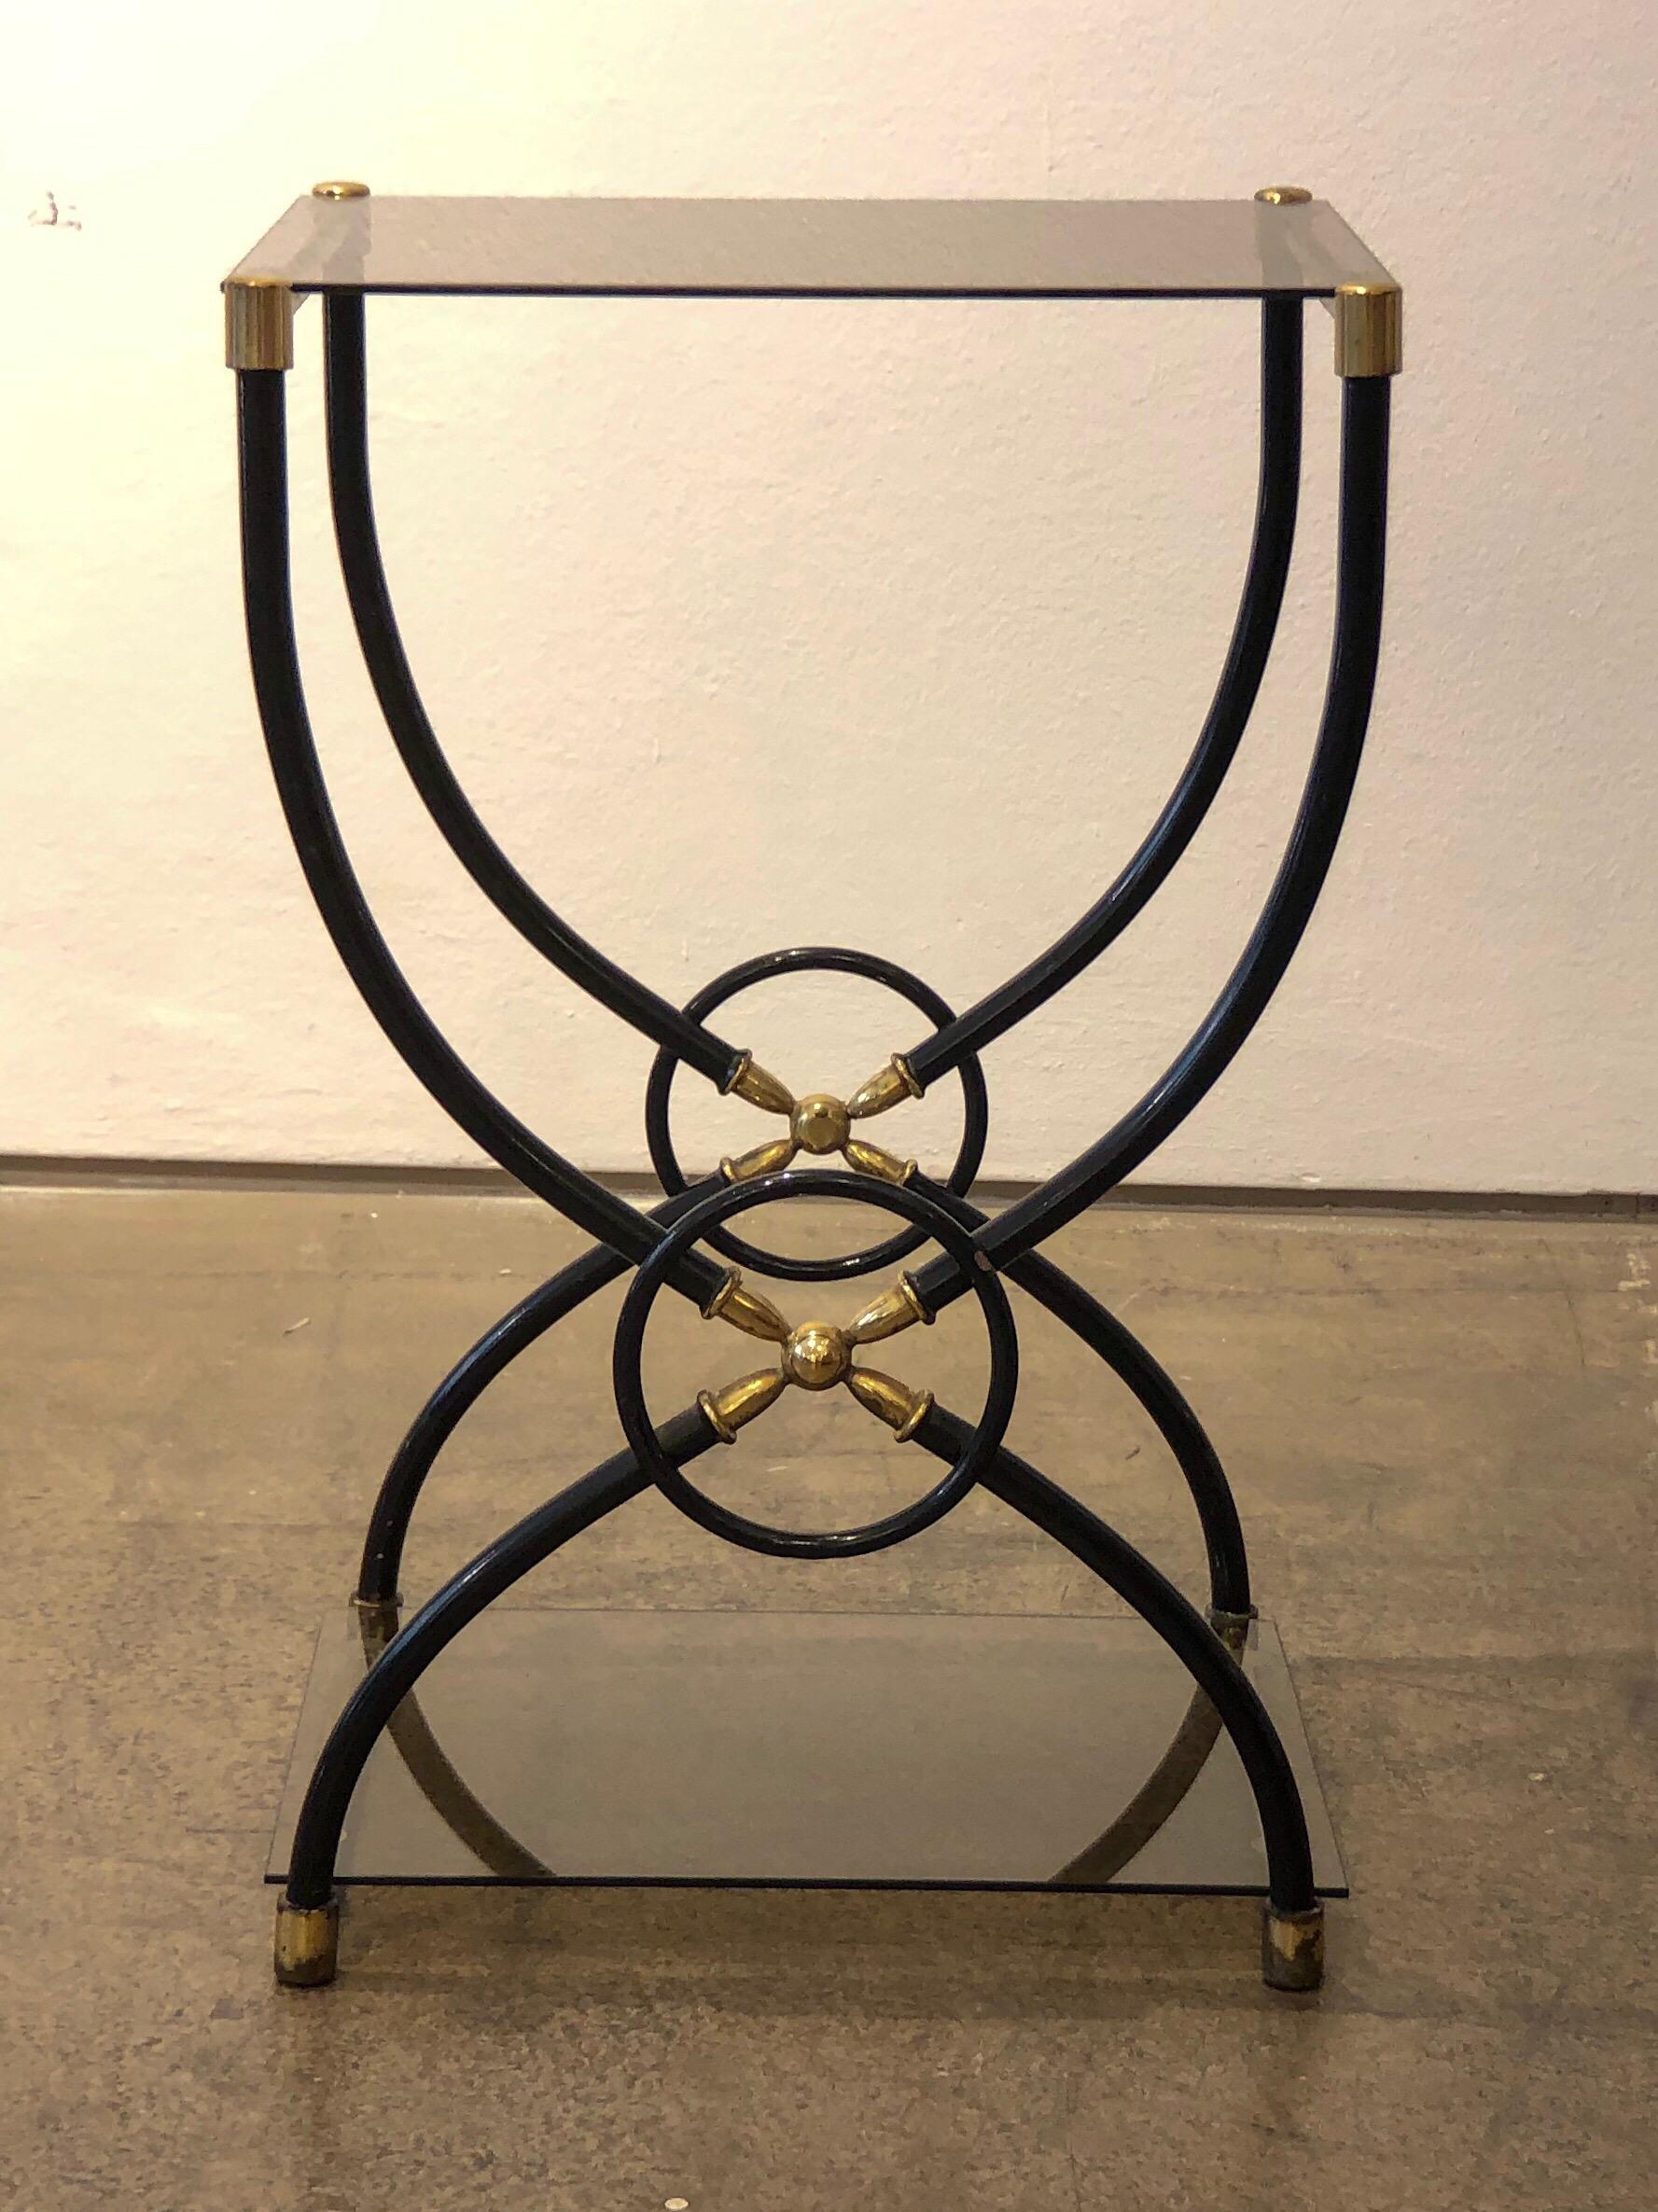 Very elegant midcentury nightstands from Italy from the 1960s. The nightstands can also be used as side tables.
The metal frame is mostly lacquered in black and has a brass squared frame at the top and the bottom. The middle part where the S-shaped